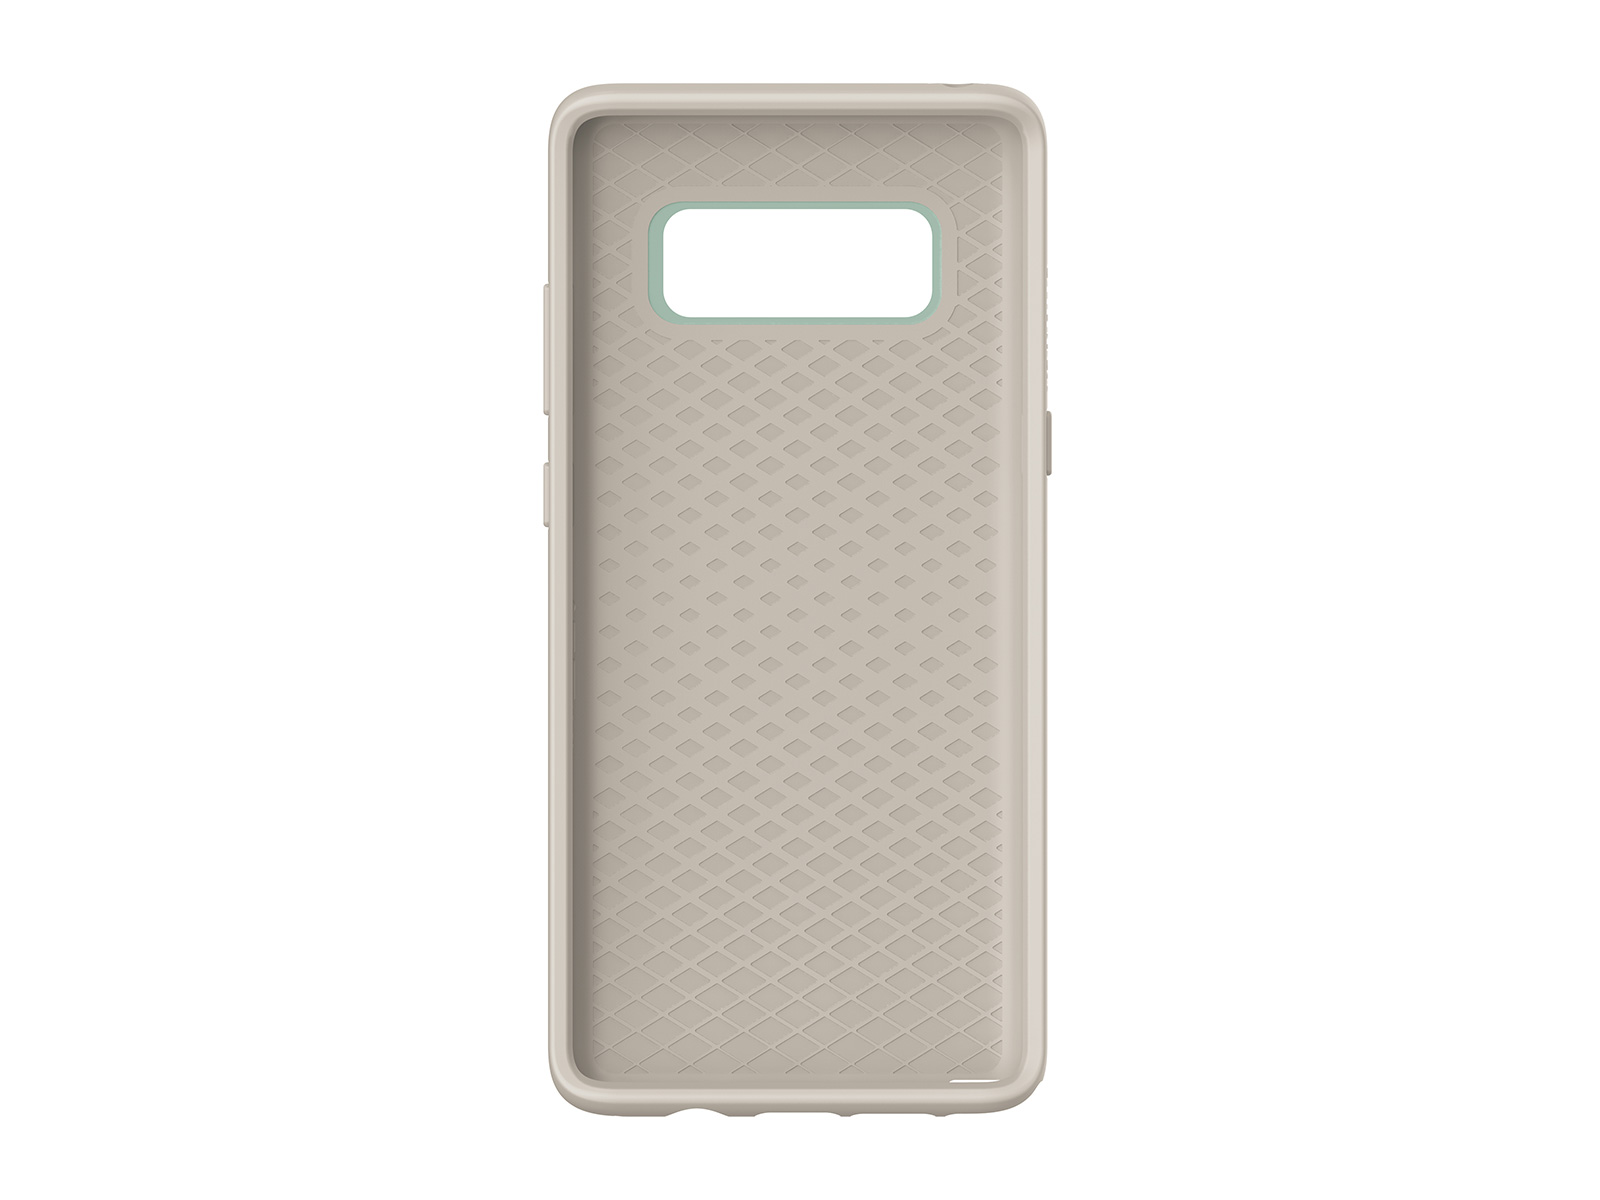 Thumbnail image of OtterBox Symmetry for Galaxy Note8, Muted Waters